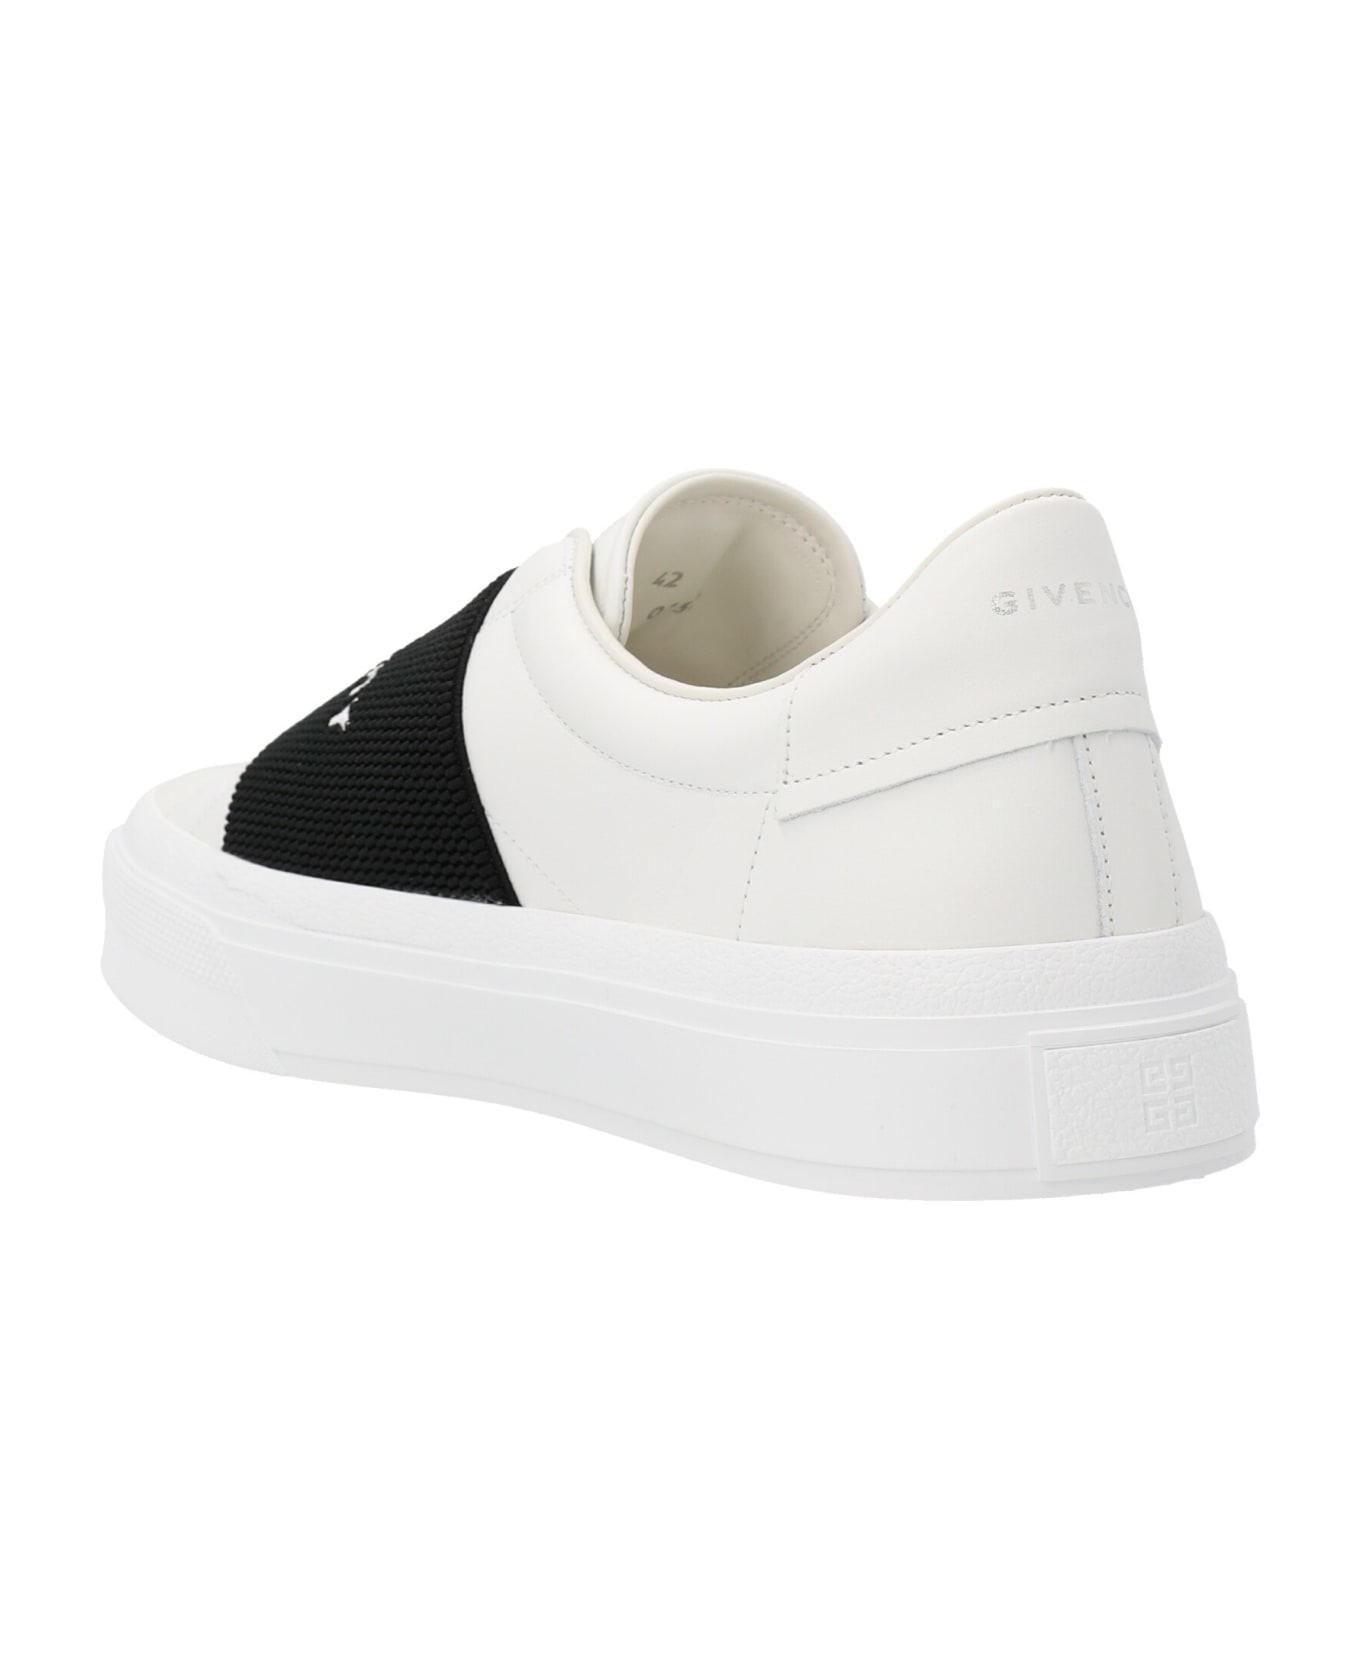 Givenchy 'city Sport' Sneakers - White/Black